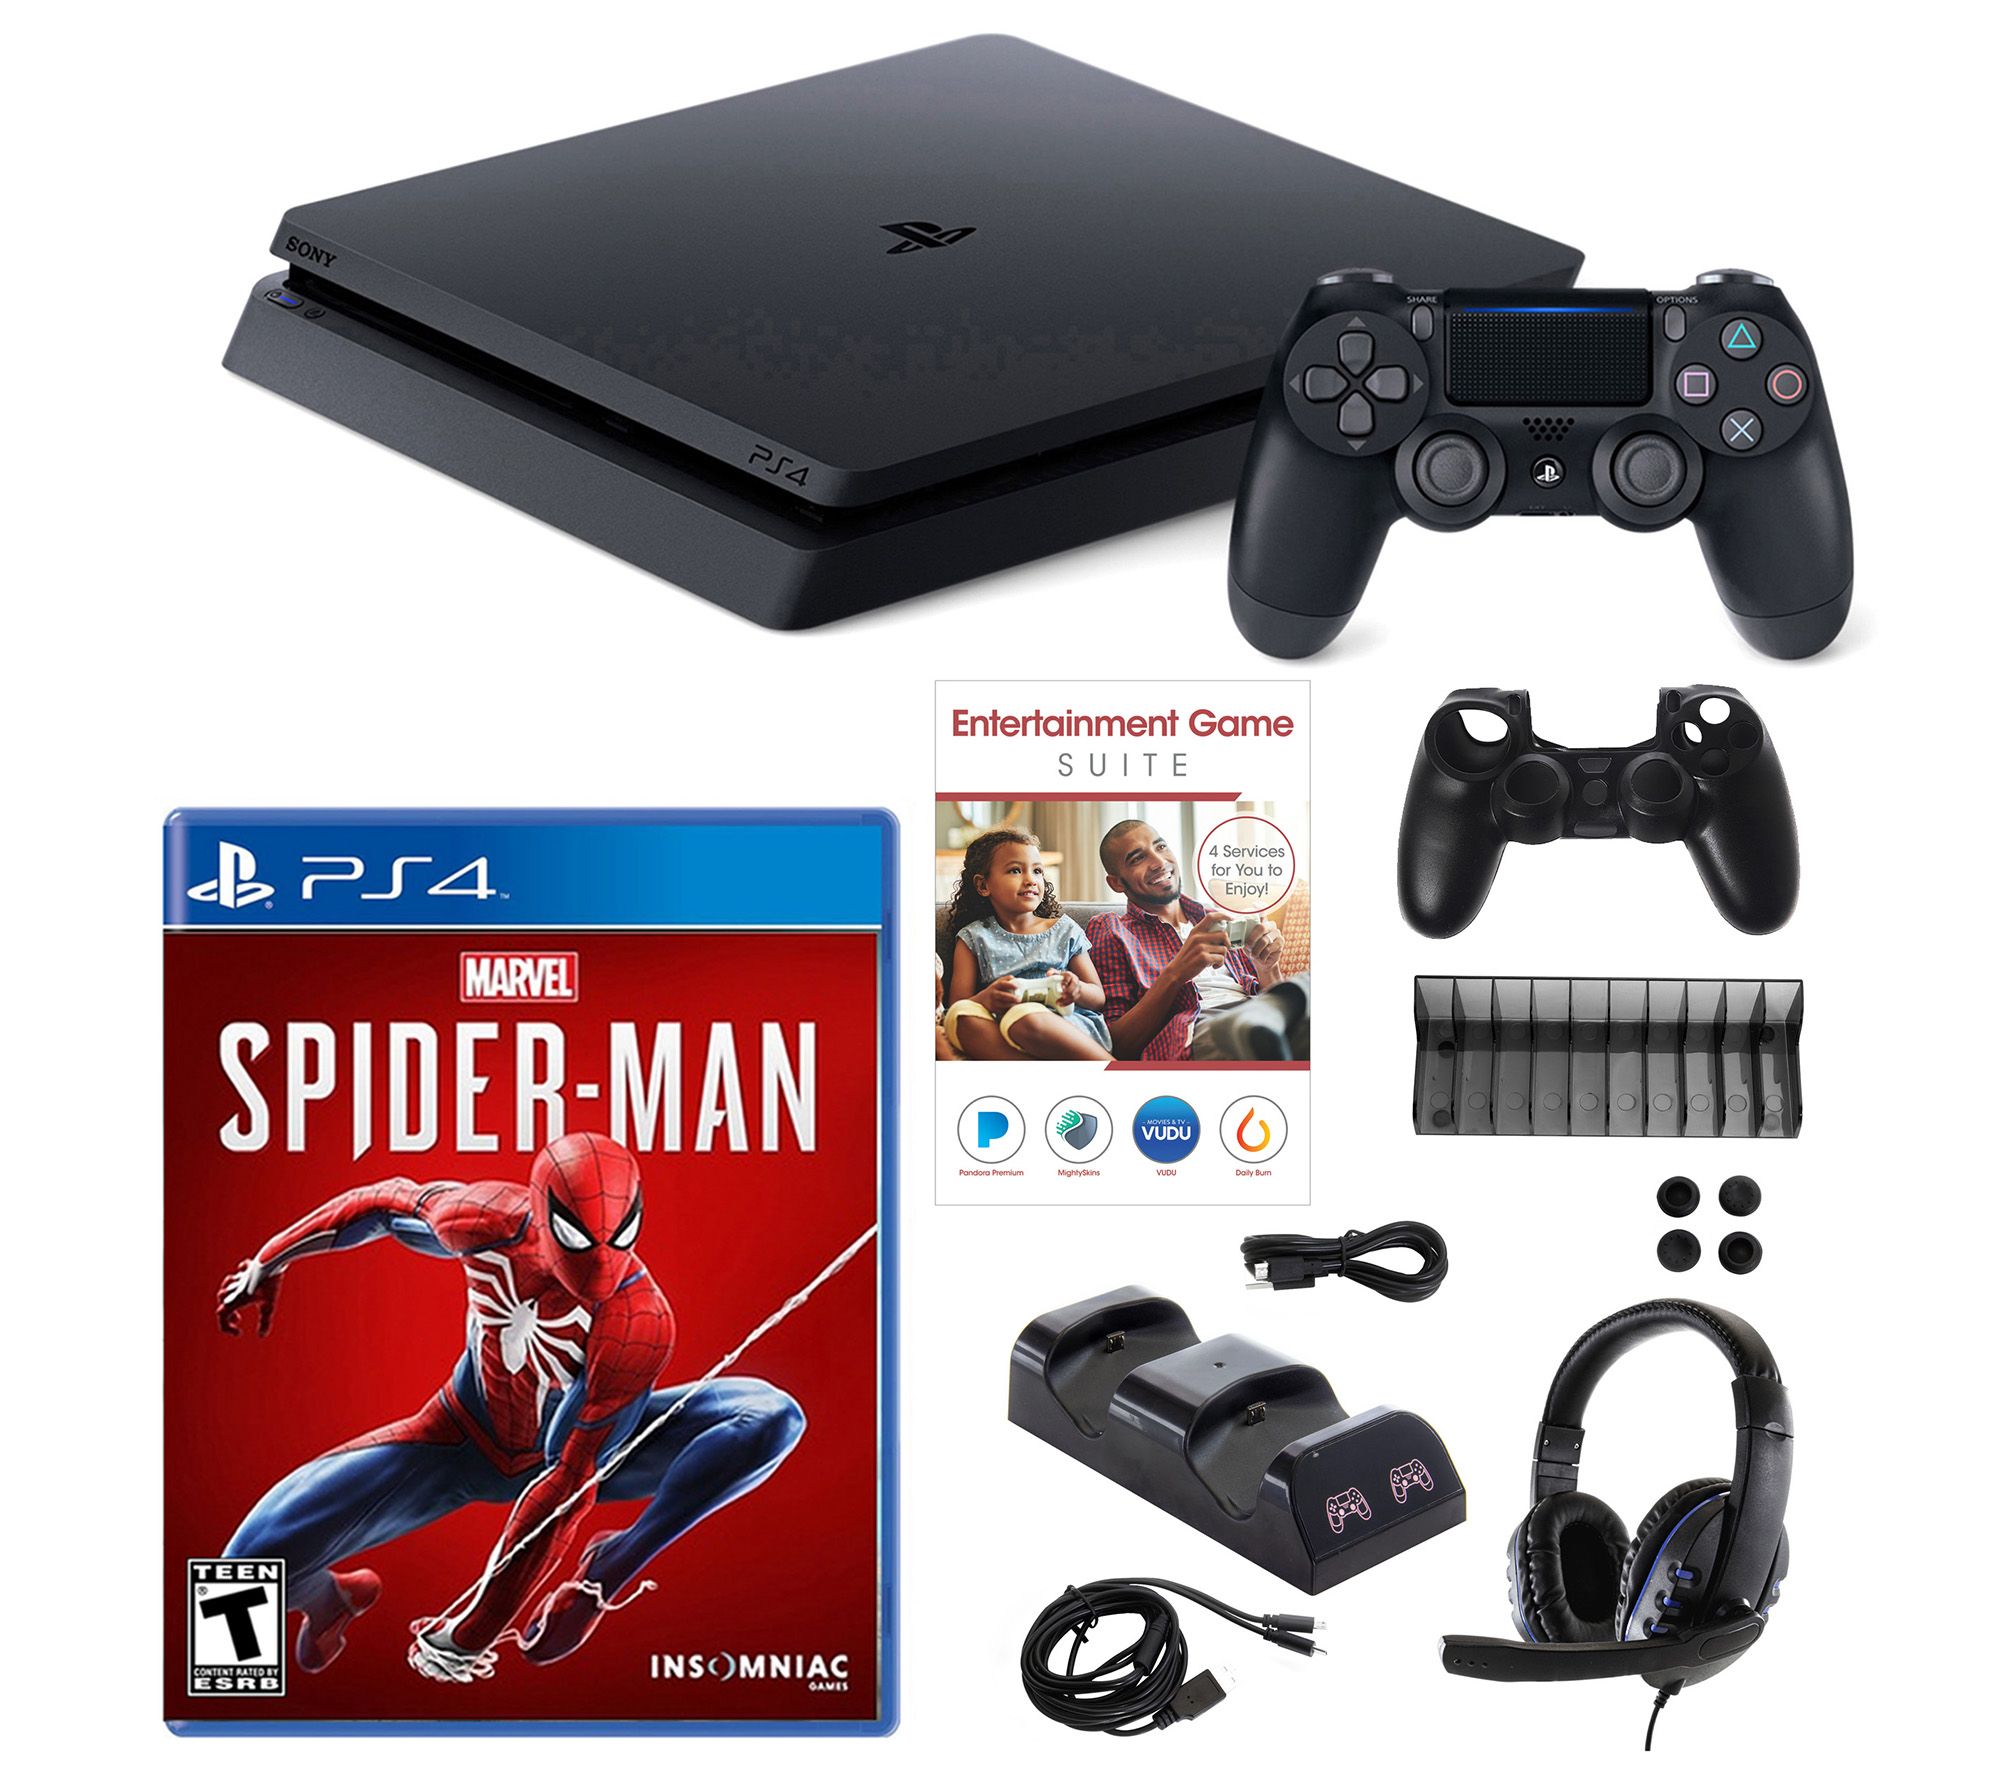 1TB Console with Spiderman Game, Voucher and Accessories Kit - QVC.com